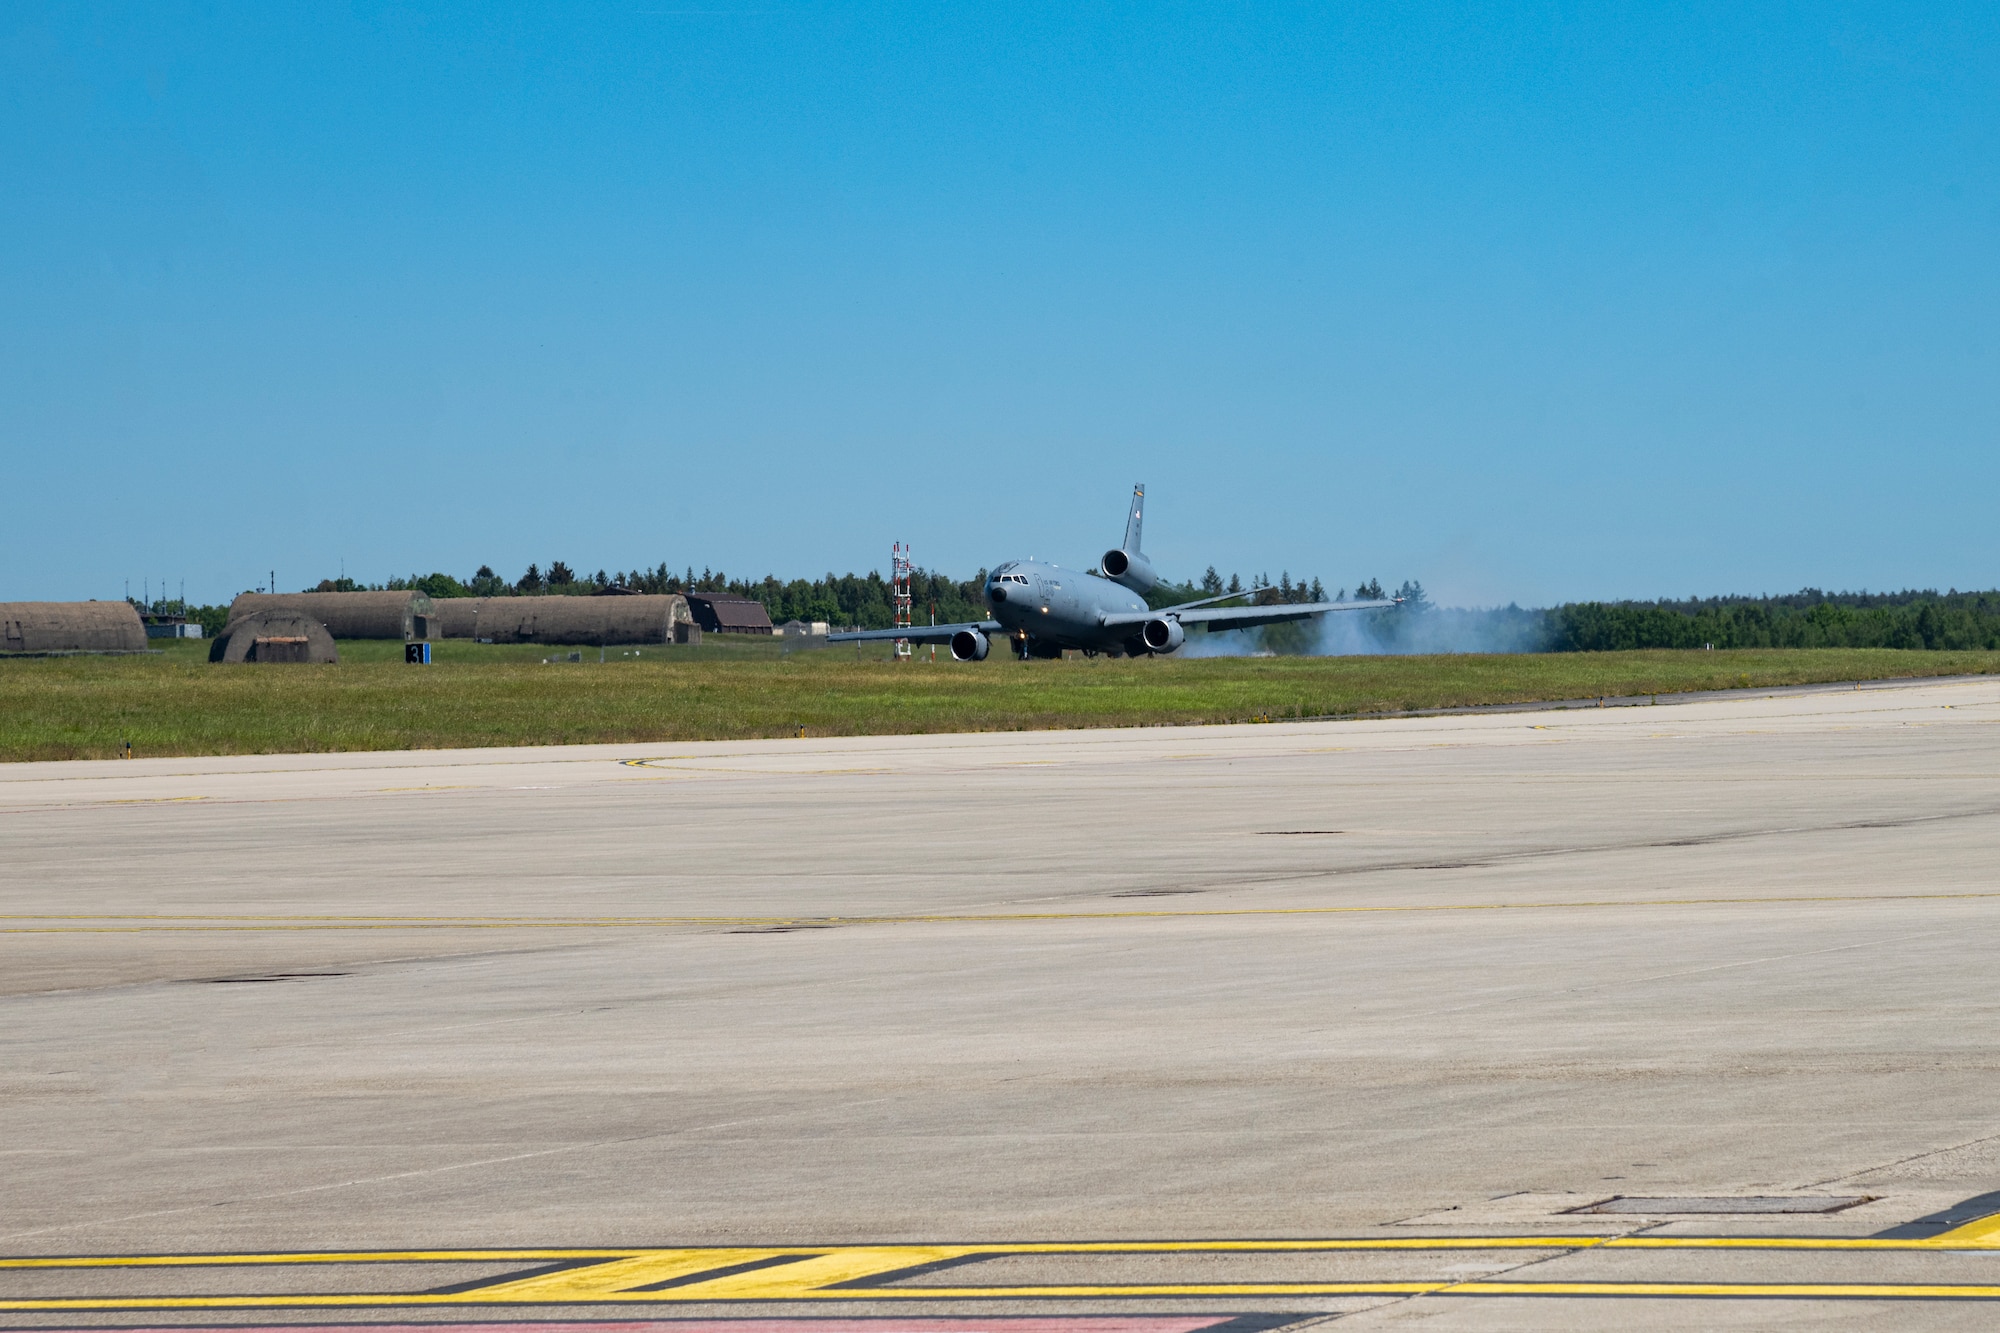 A KC-10 Extender aircraft assigned to the 305th Air Mobility Wing at Joint Base McGuire-Dix-Lakehurst, New Jersey, arrives at Spangdahlem Air Base, Germany, May 14, 2022. The 305th AMW generates, mobilizes and deploys C-17 Globemaster III and KC-10 Extender aircraft and are currently supporting operations within the European theater.  (U.S. Air Force photo by Senior Airman Ali Stewart)